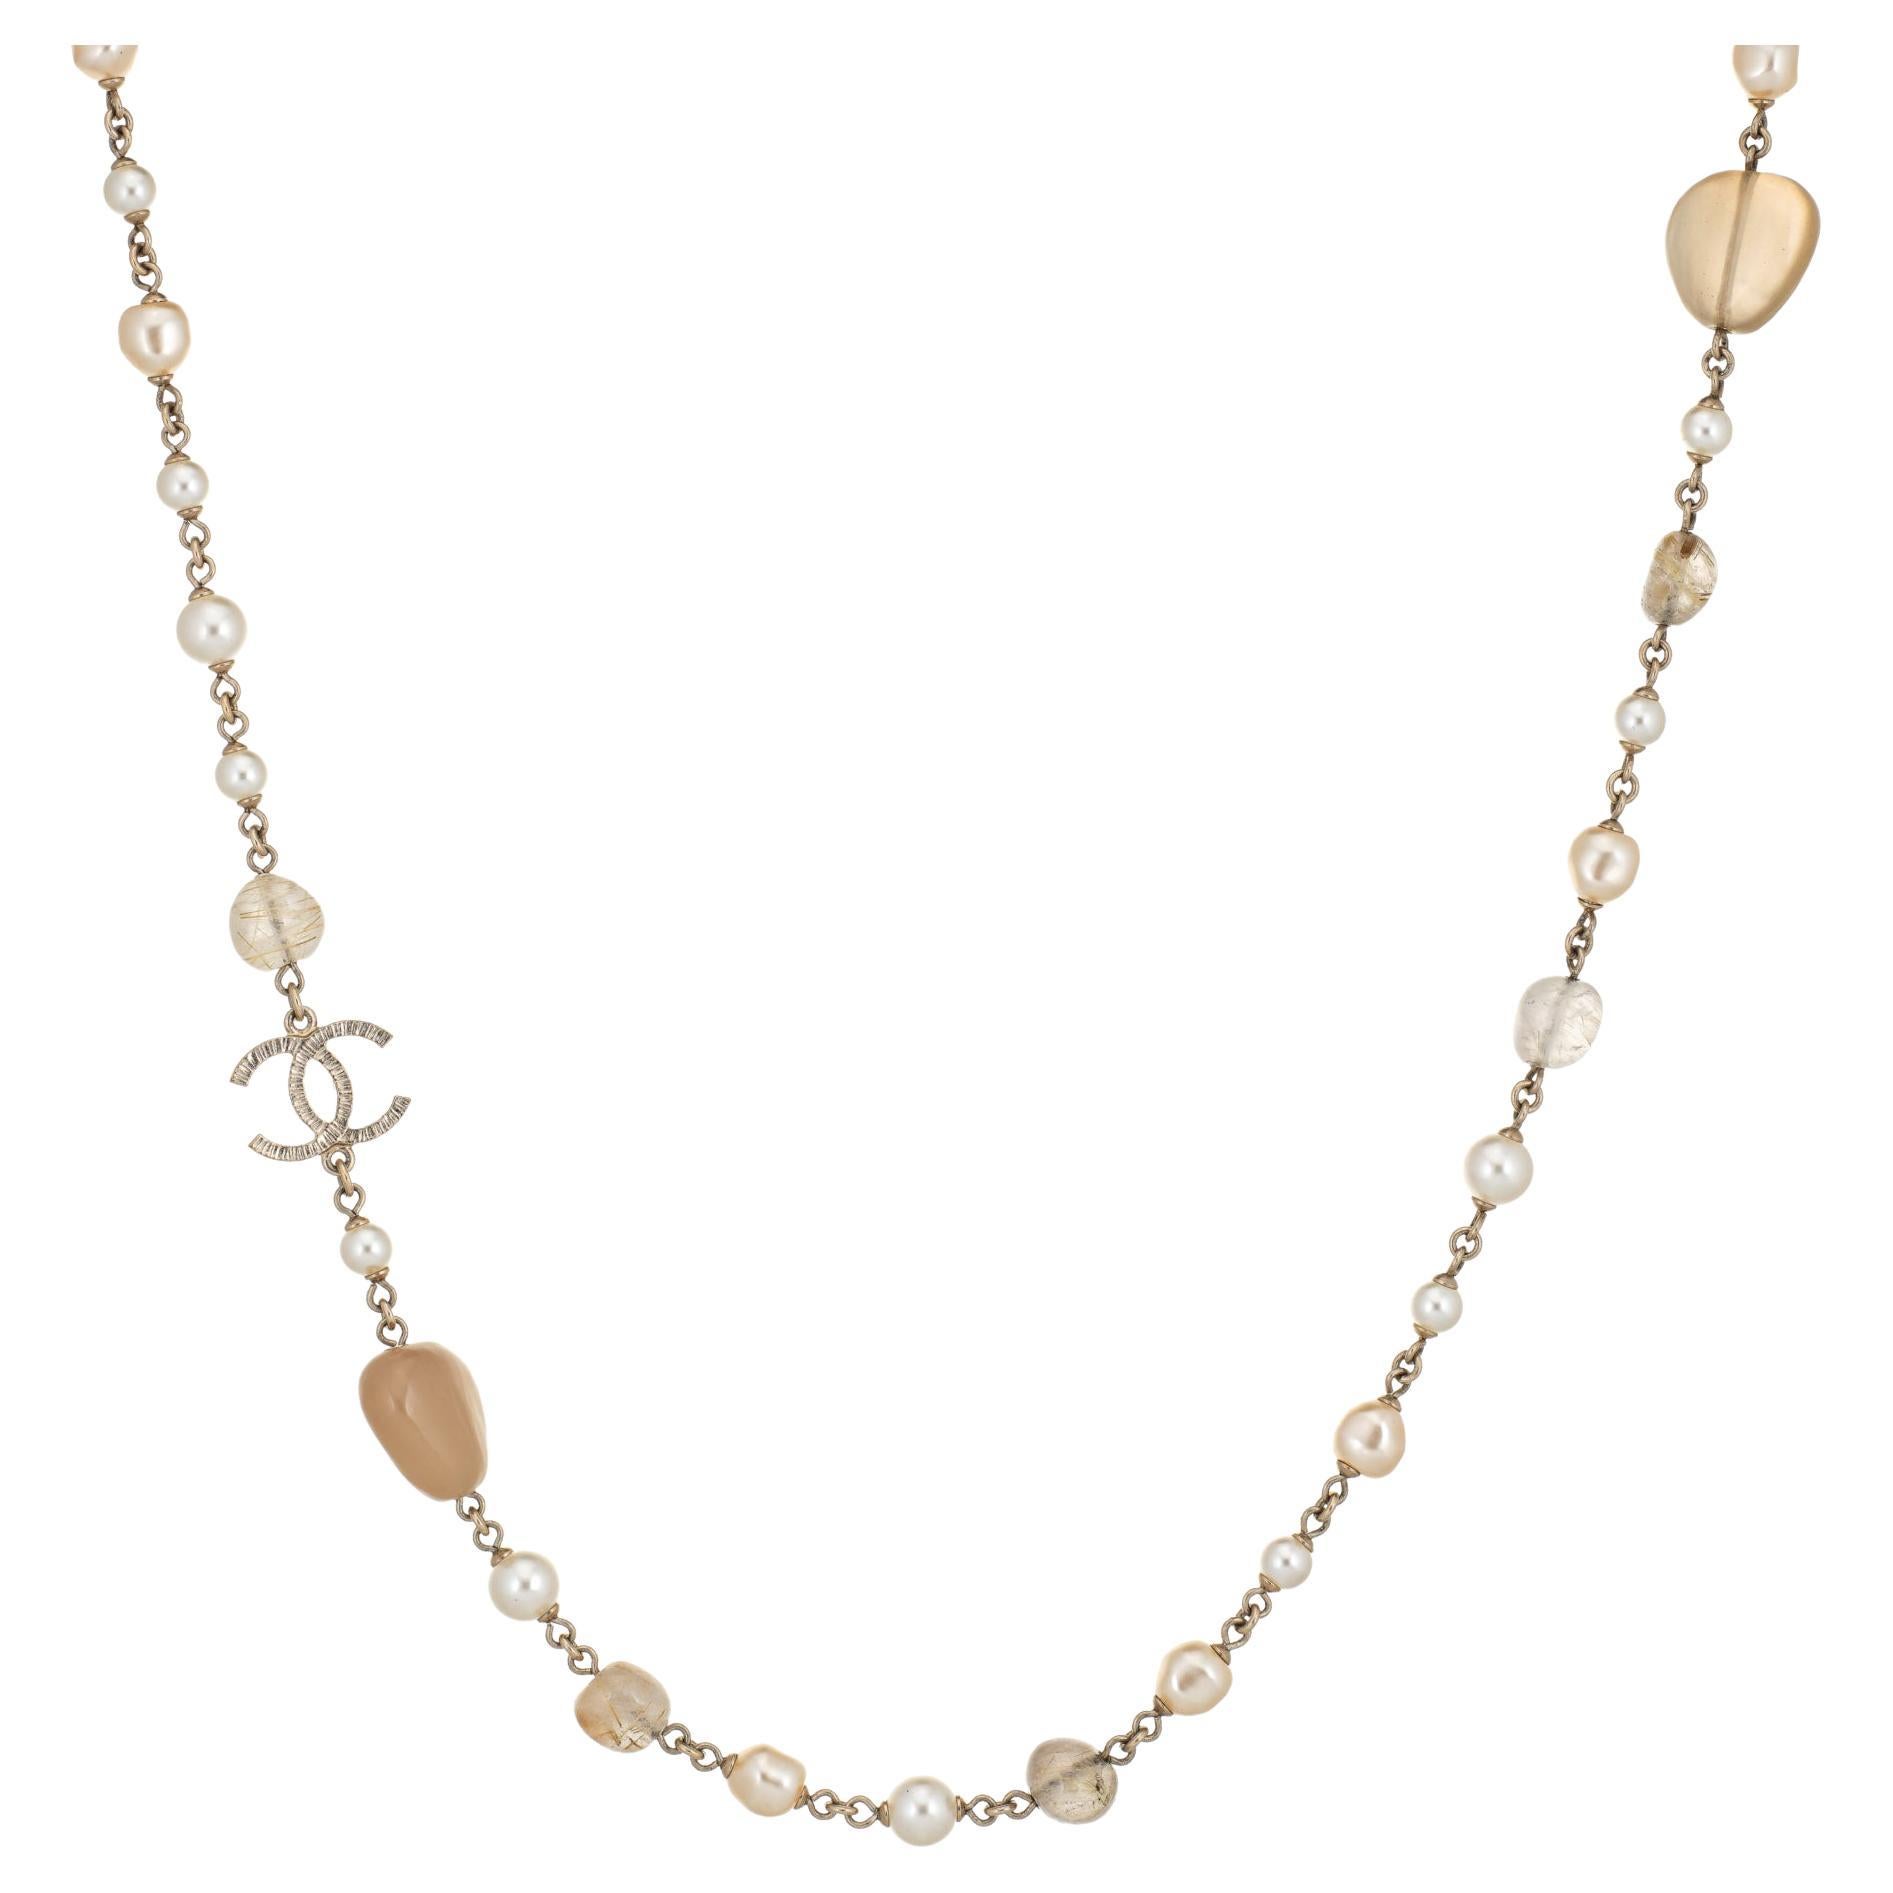 Chanel Faux Pearl Bead Necklace c2014 Cruise Long 41" Estate Yellow Gold Tone  For Sale